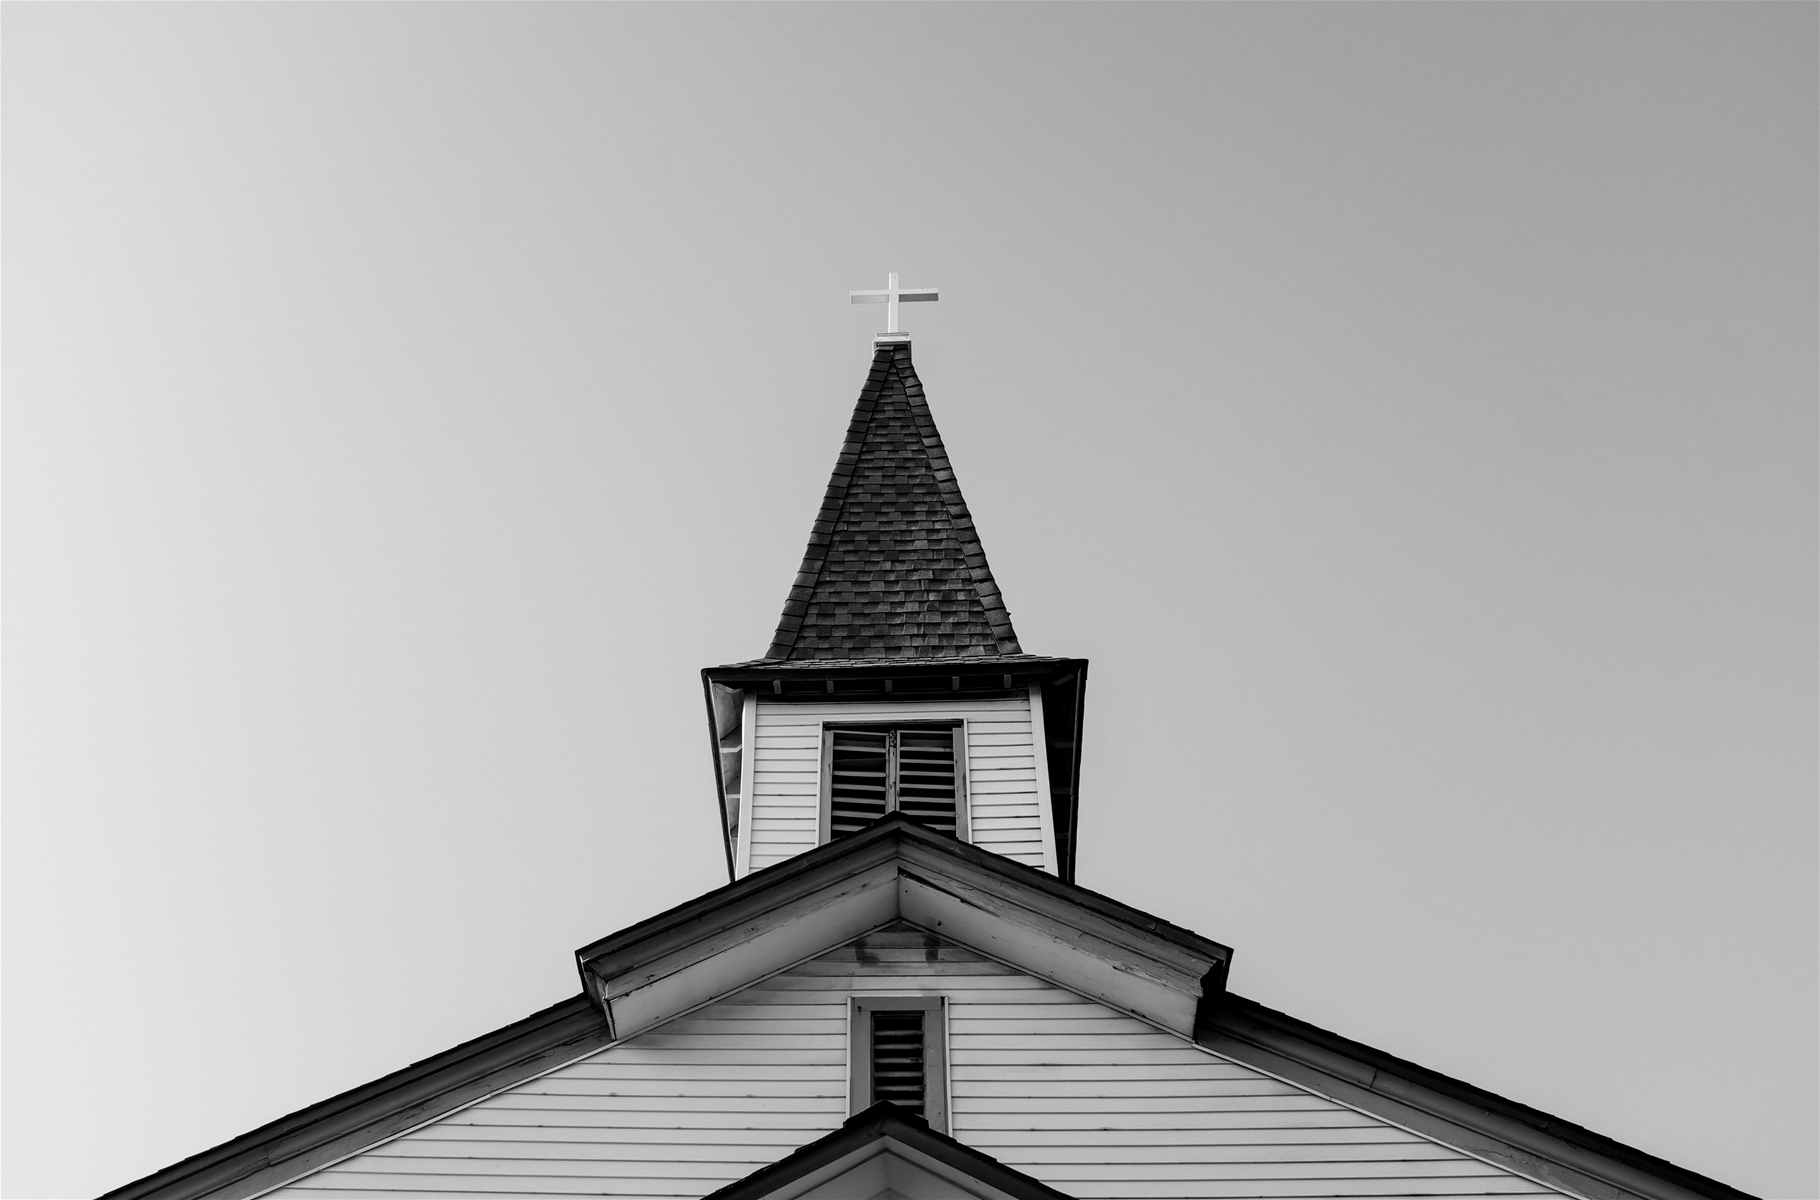 Top of Church with Cross in Black and White